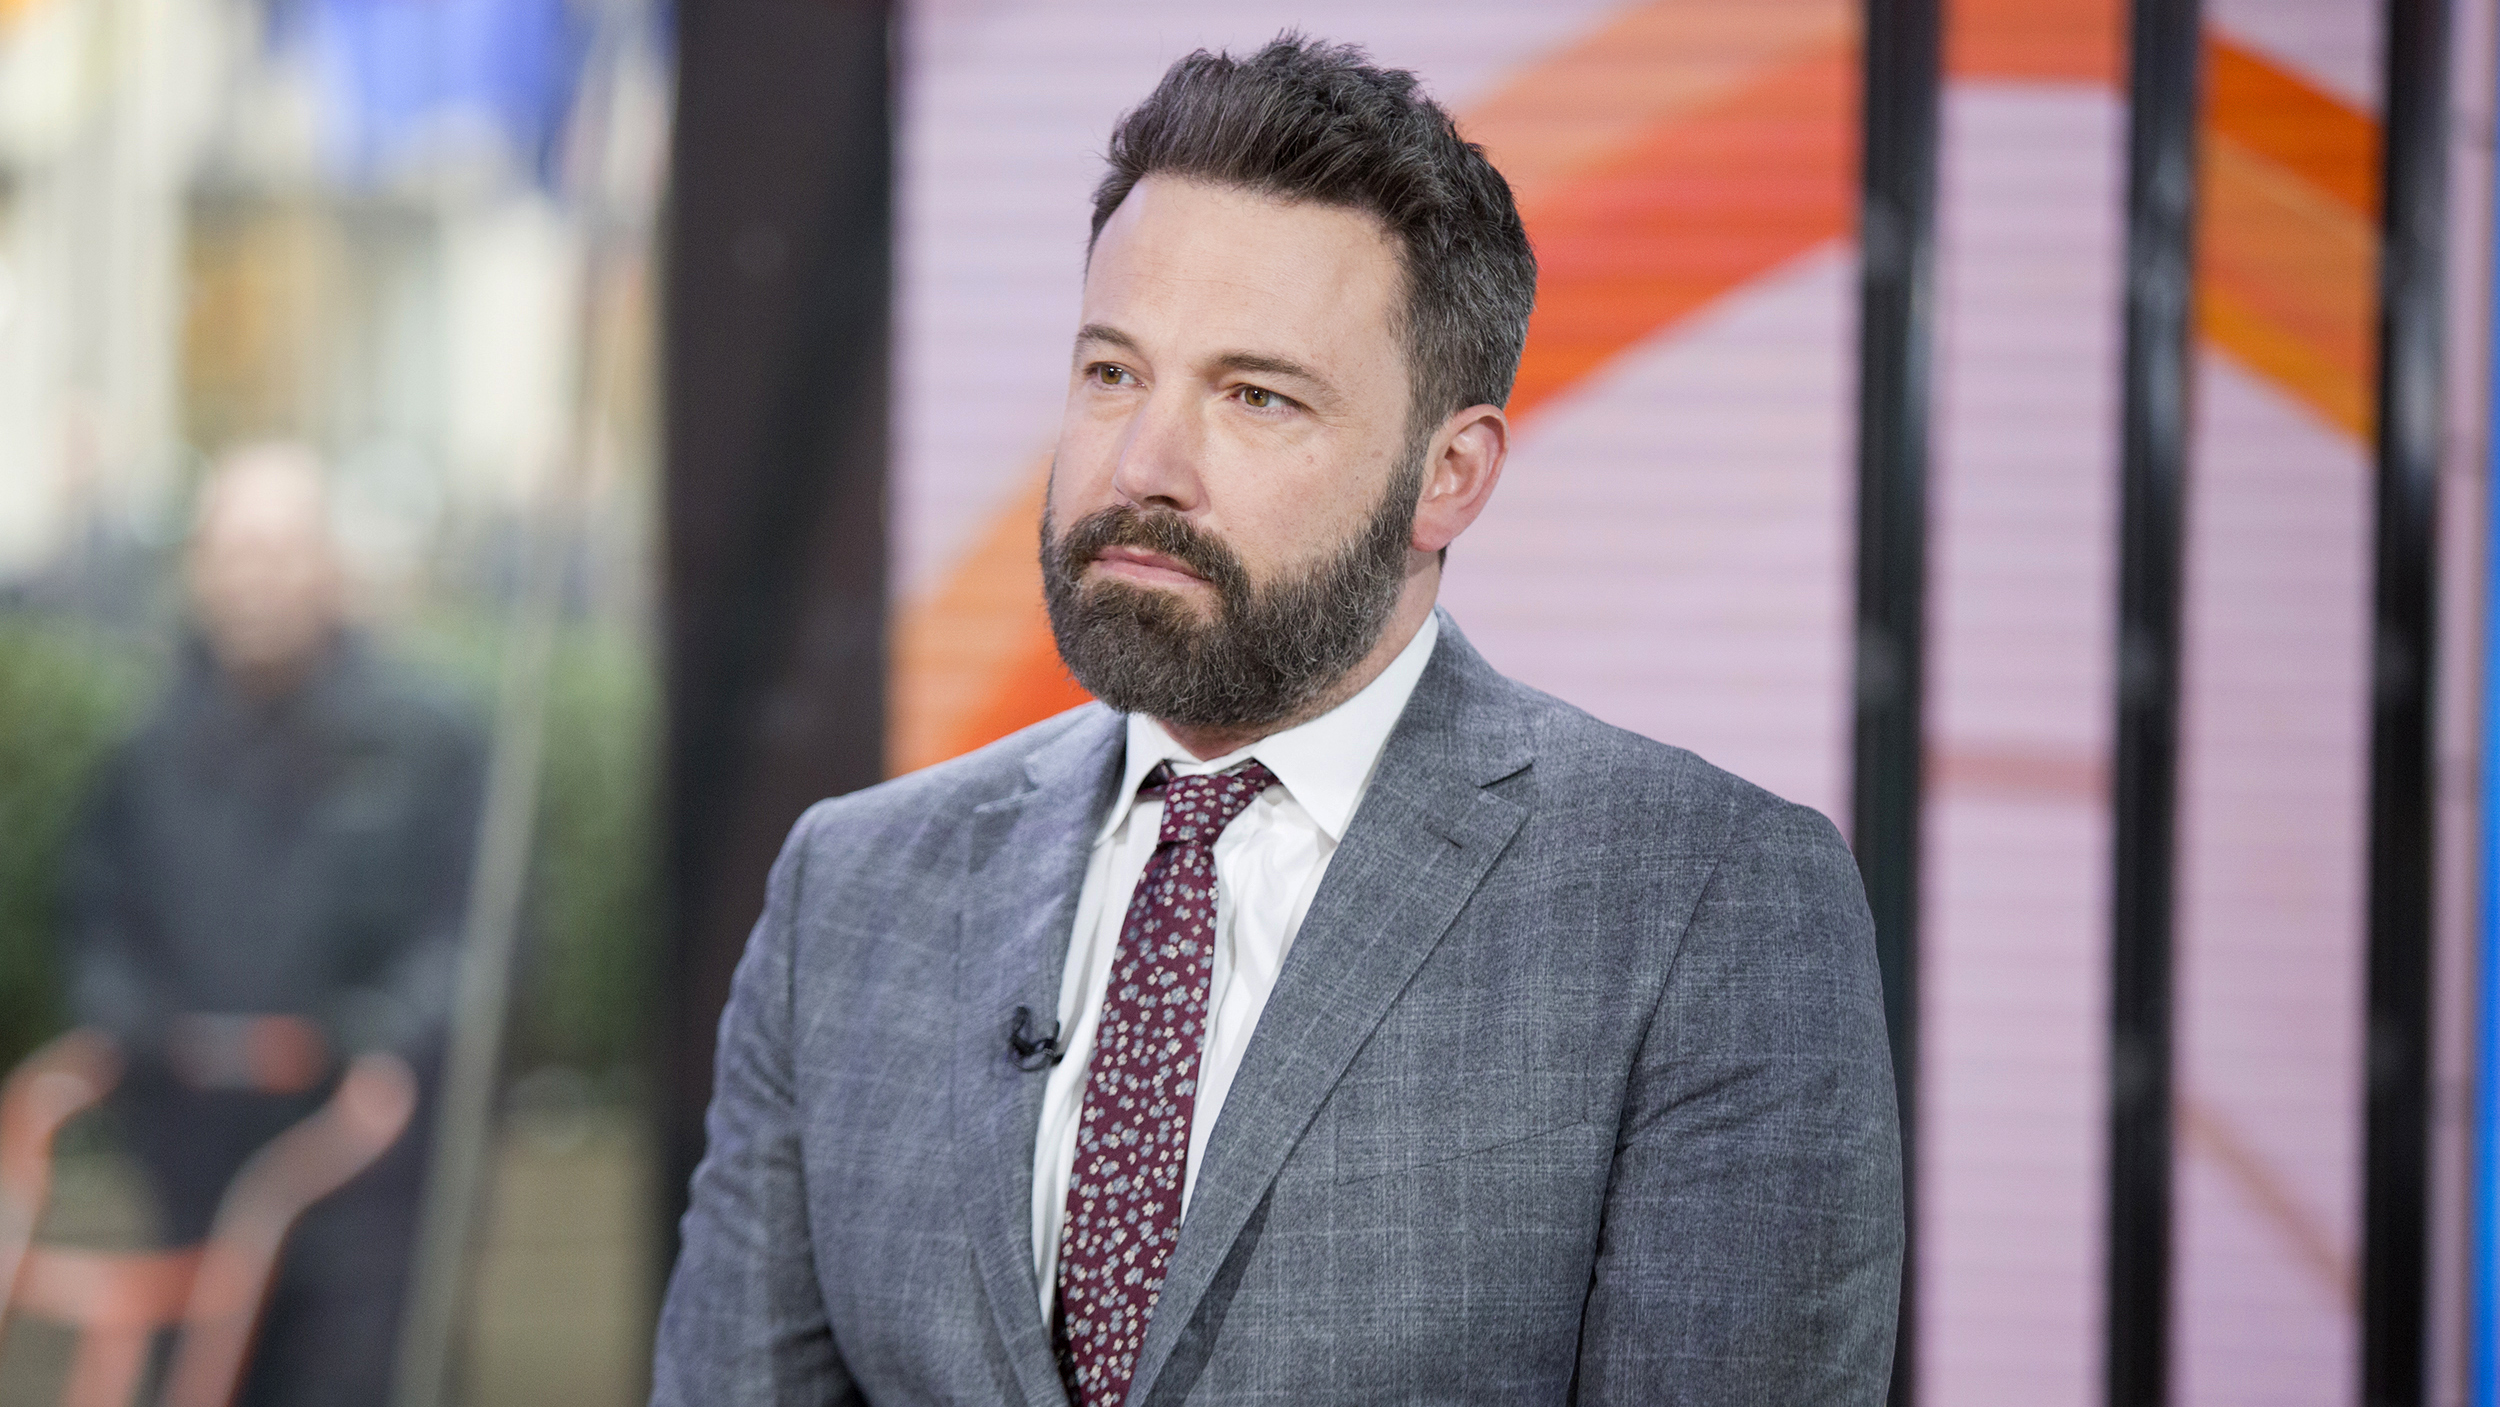 Ben Affleck during an interview on the "Today" show on November 16, 2017 | Source: Getty Images